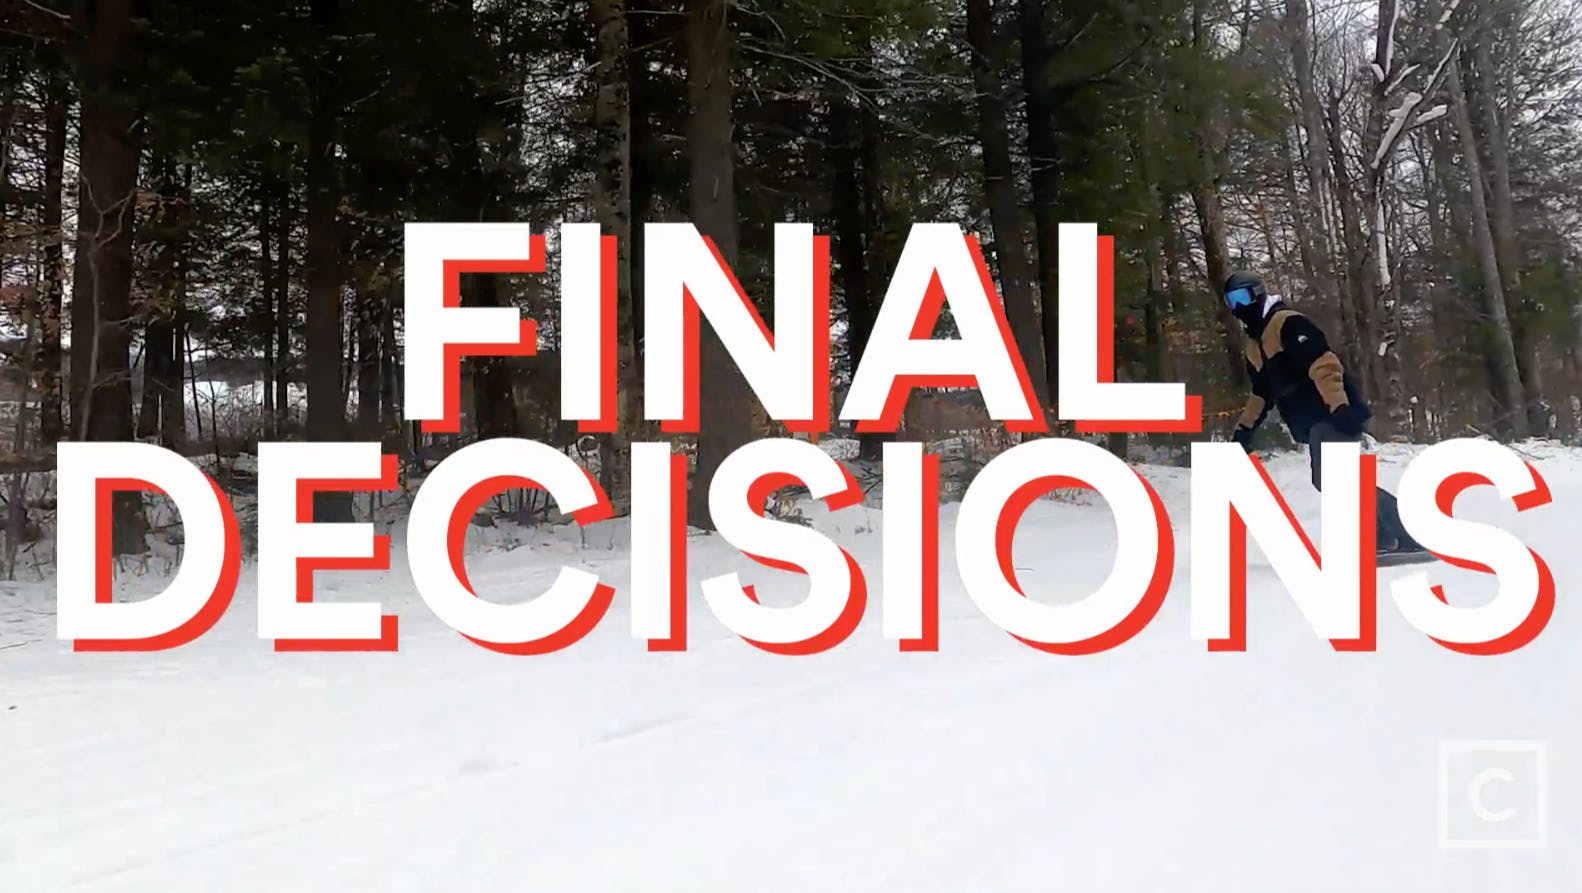 A ski slope with a "Final Decisions" graphic over the image